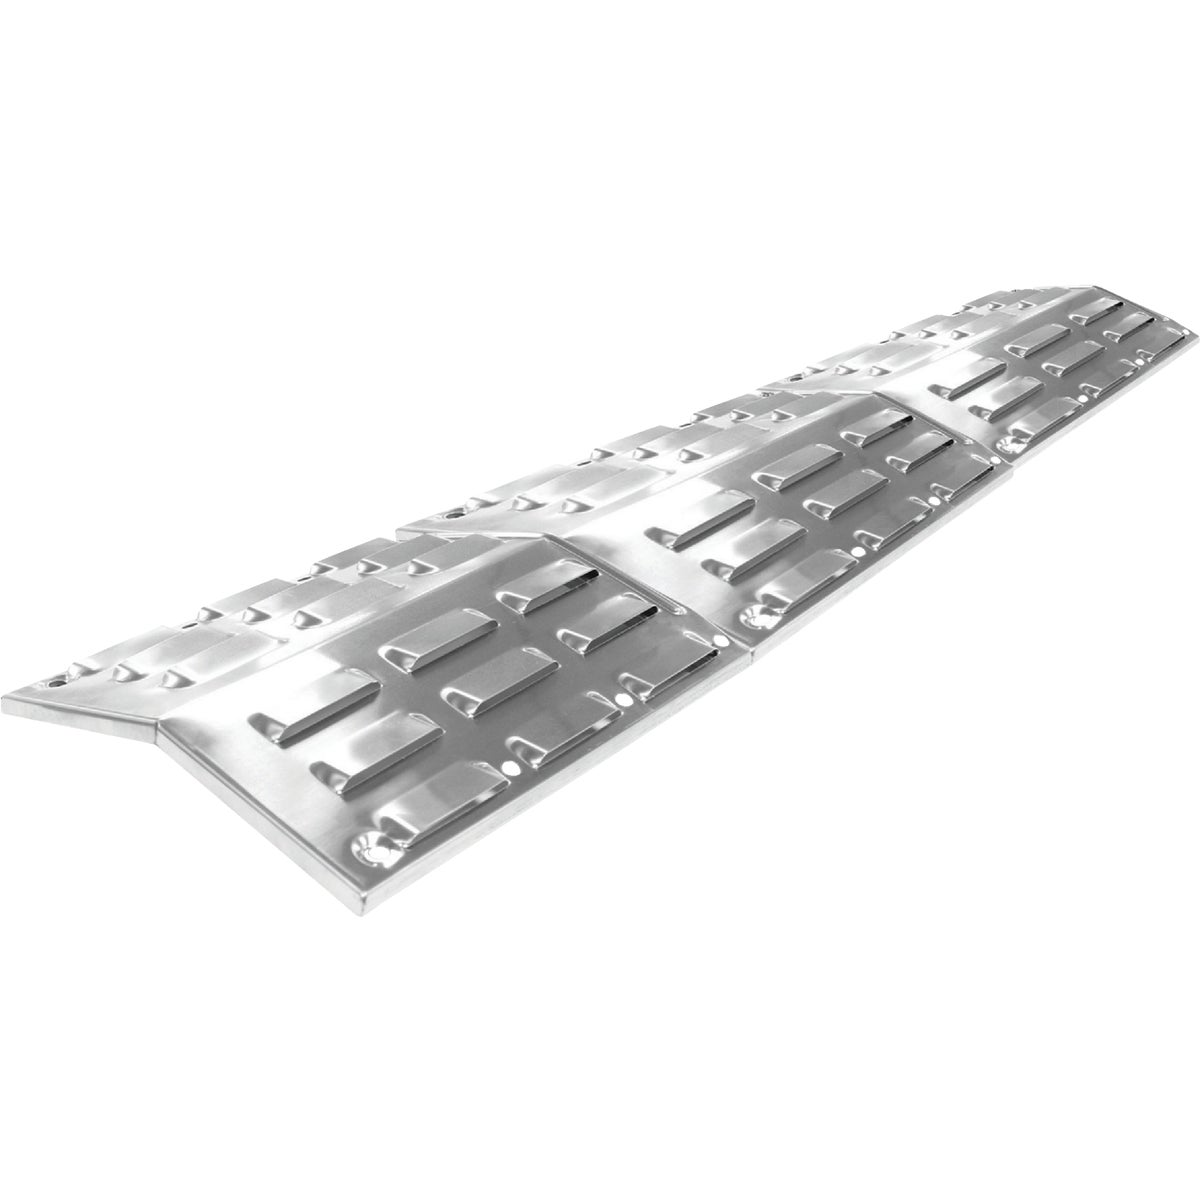 Item 801221, Universal, adjustable 2-piece heat plate is to be used with H or bar 